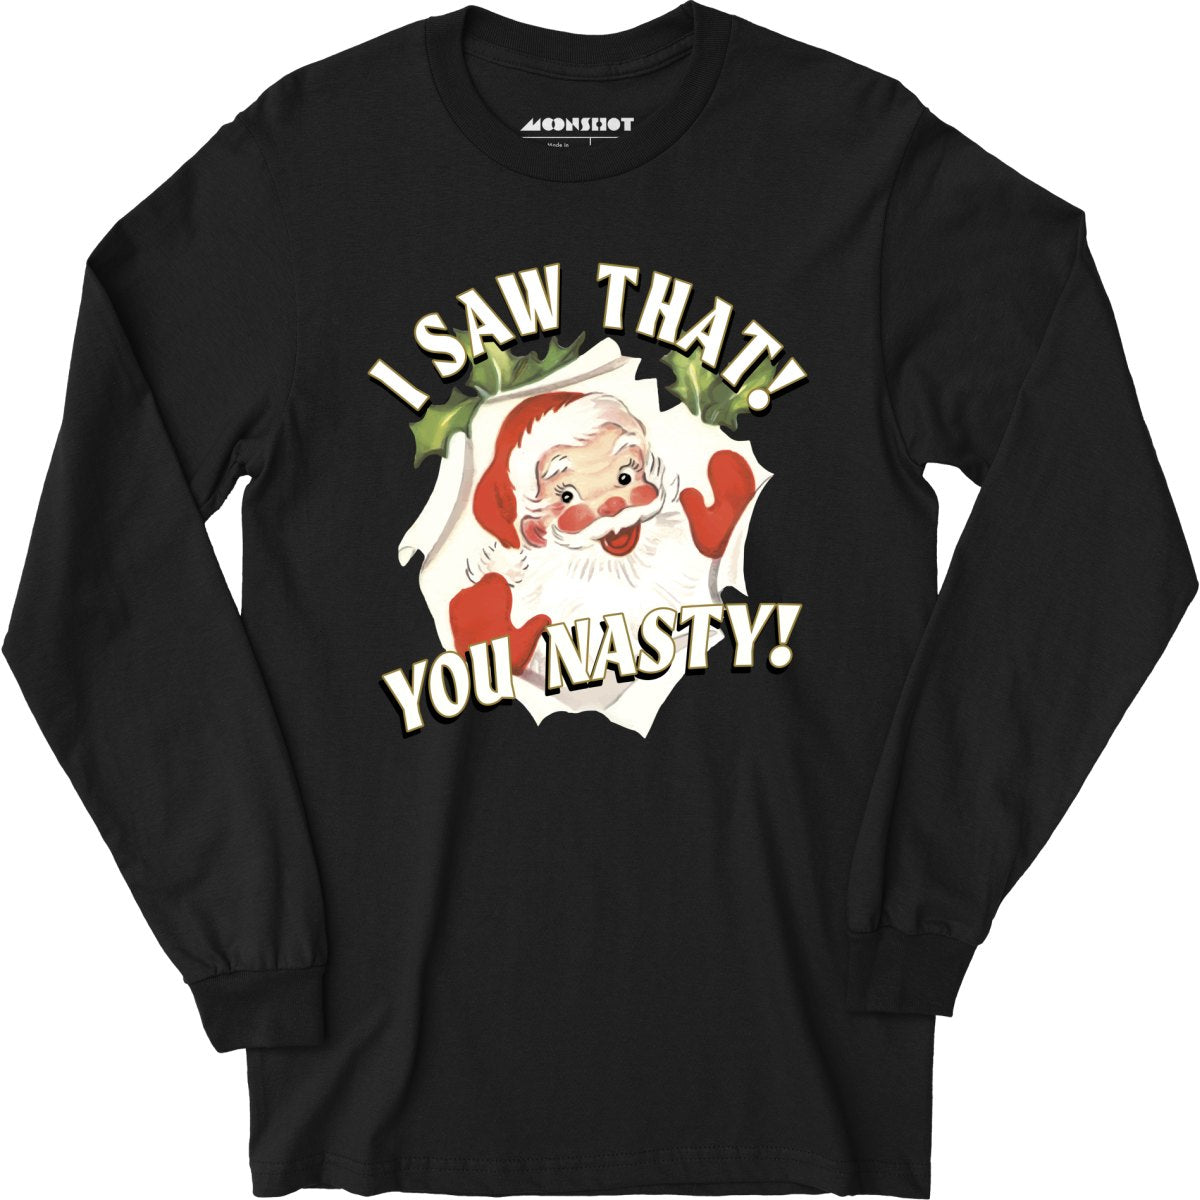 I Saw That You Nasty - Long Sleeve T-Shirt